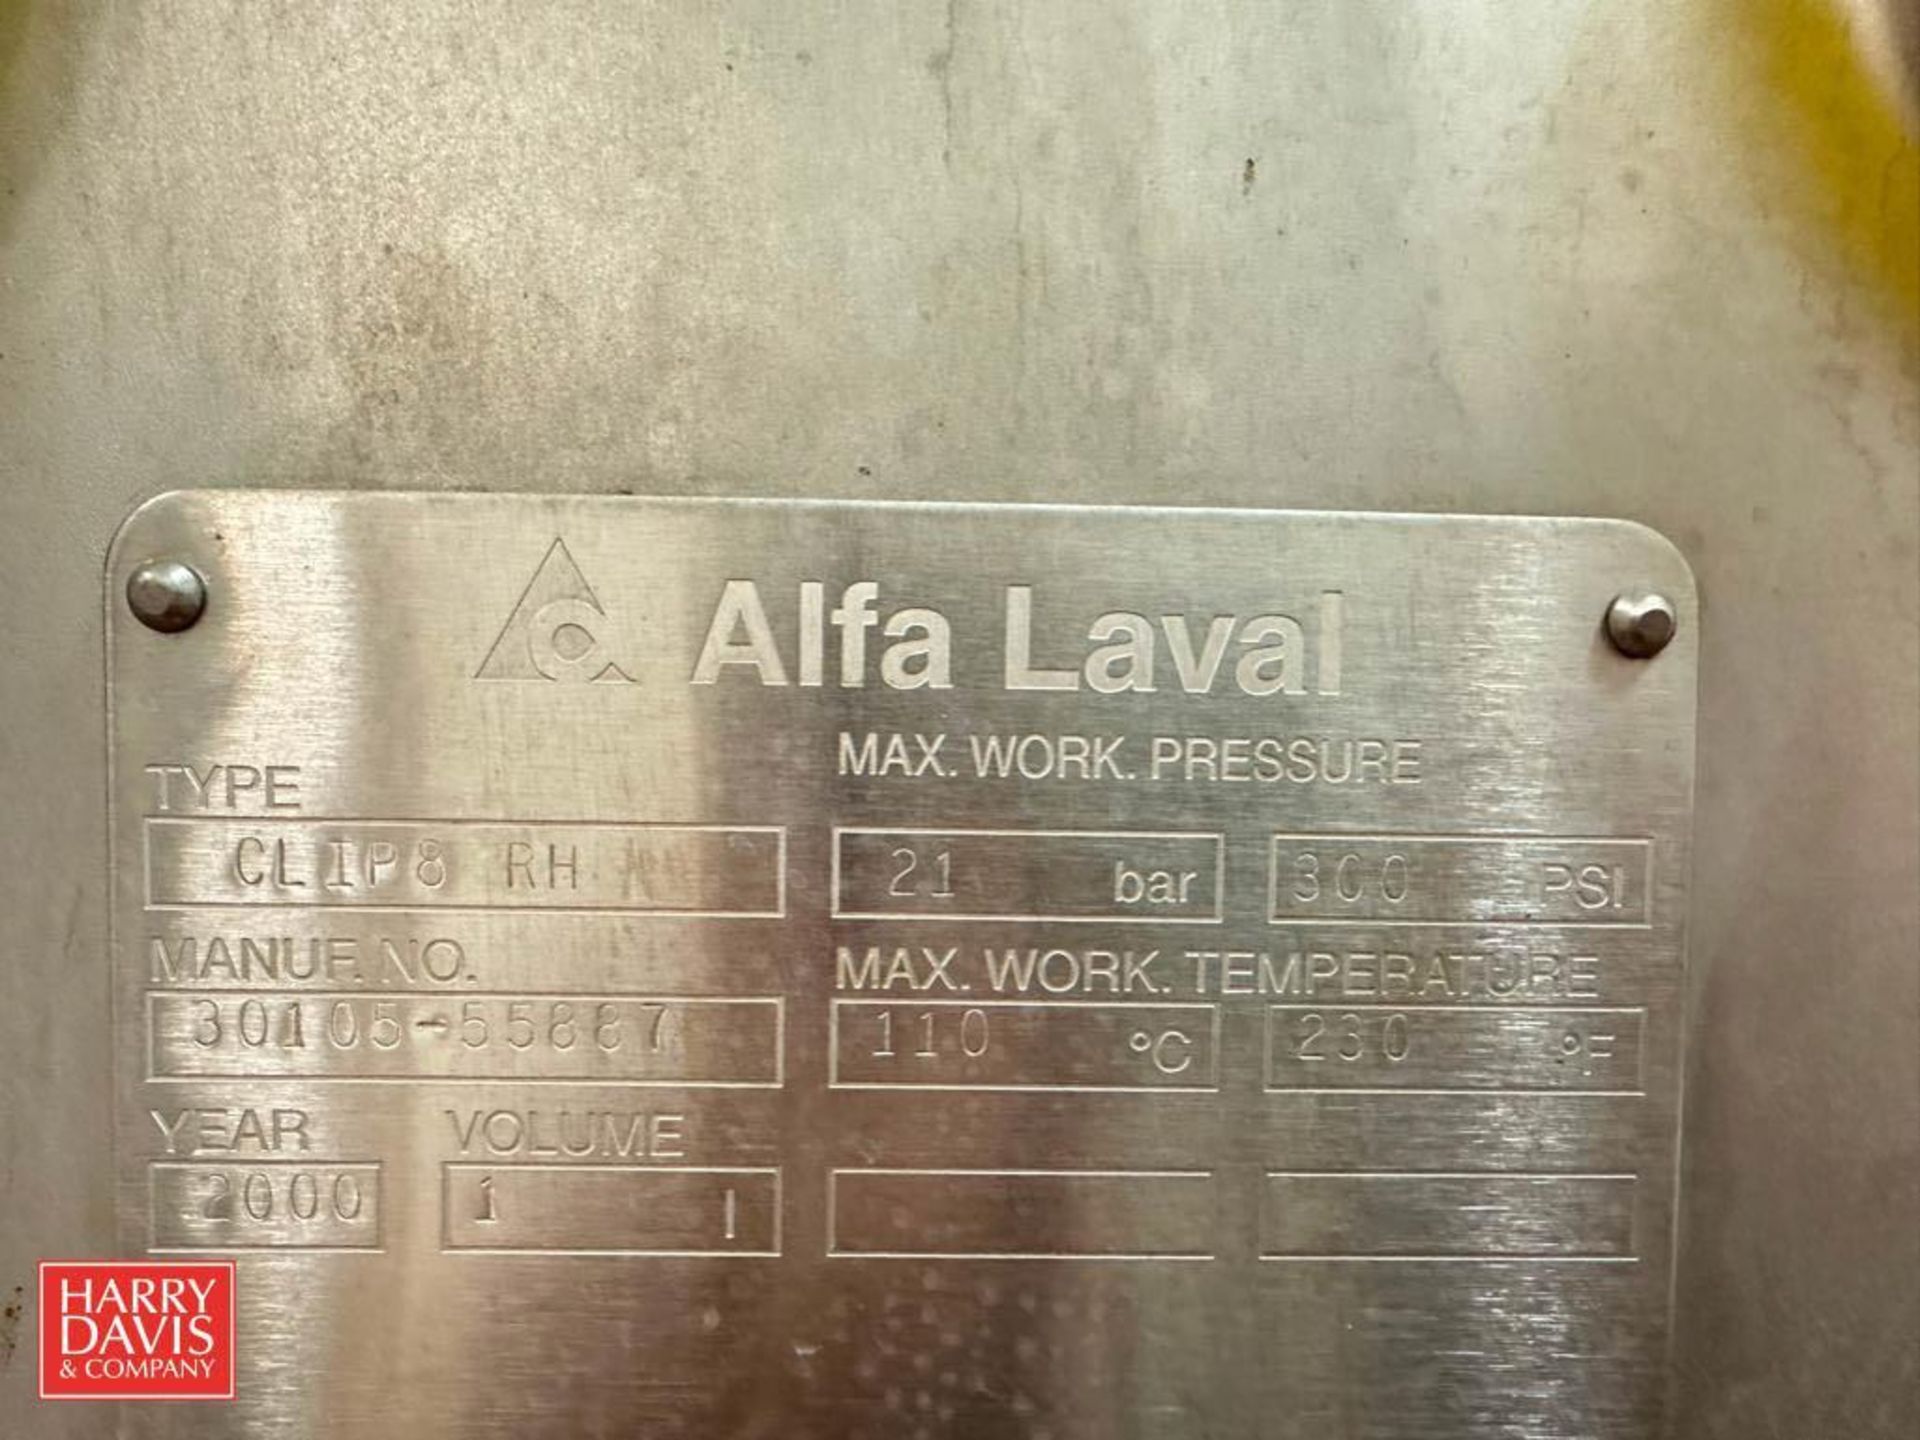 Alfa Laval Pasteurizer with Alfa Laval 2-Zone S/S Plate Heat Exchanger Model: CLIP8RH, S/N: 30105-55 - Image 4 of 11